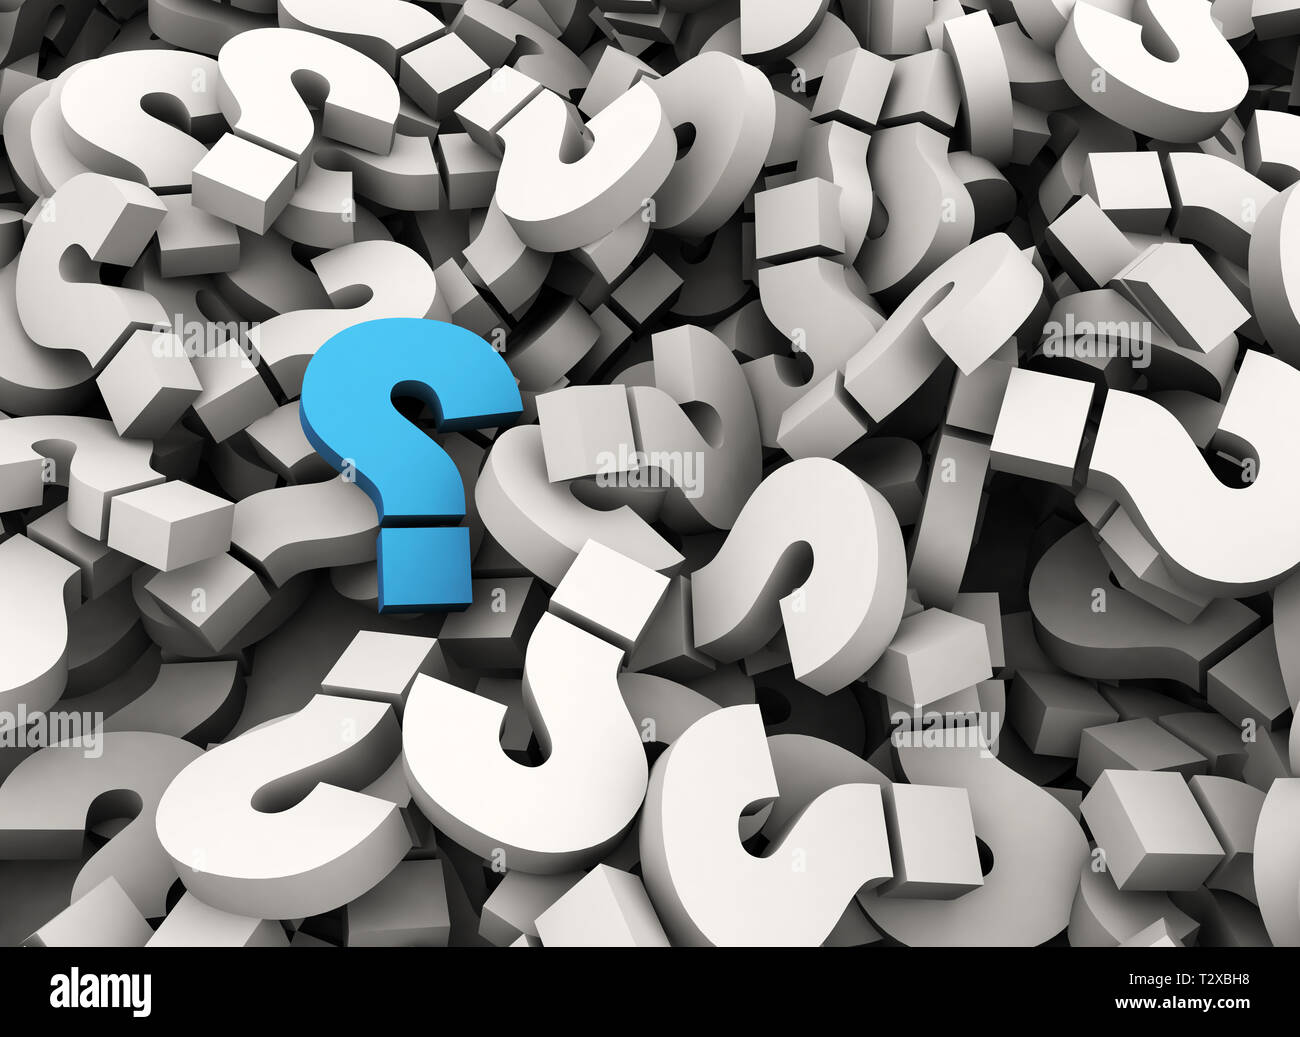 Single blue question mark standing out in a pile. 3D illustration Stock Photo